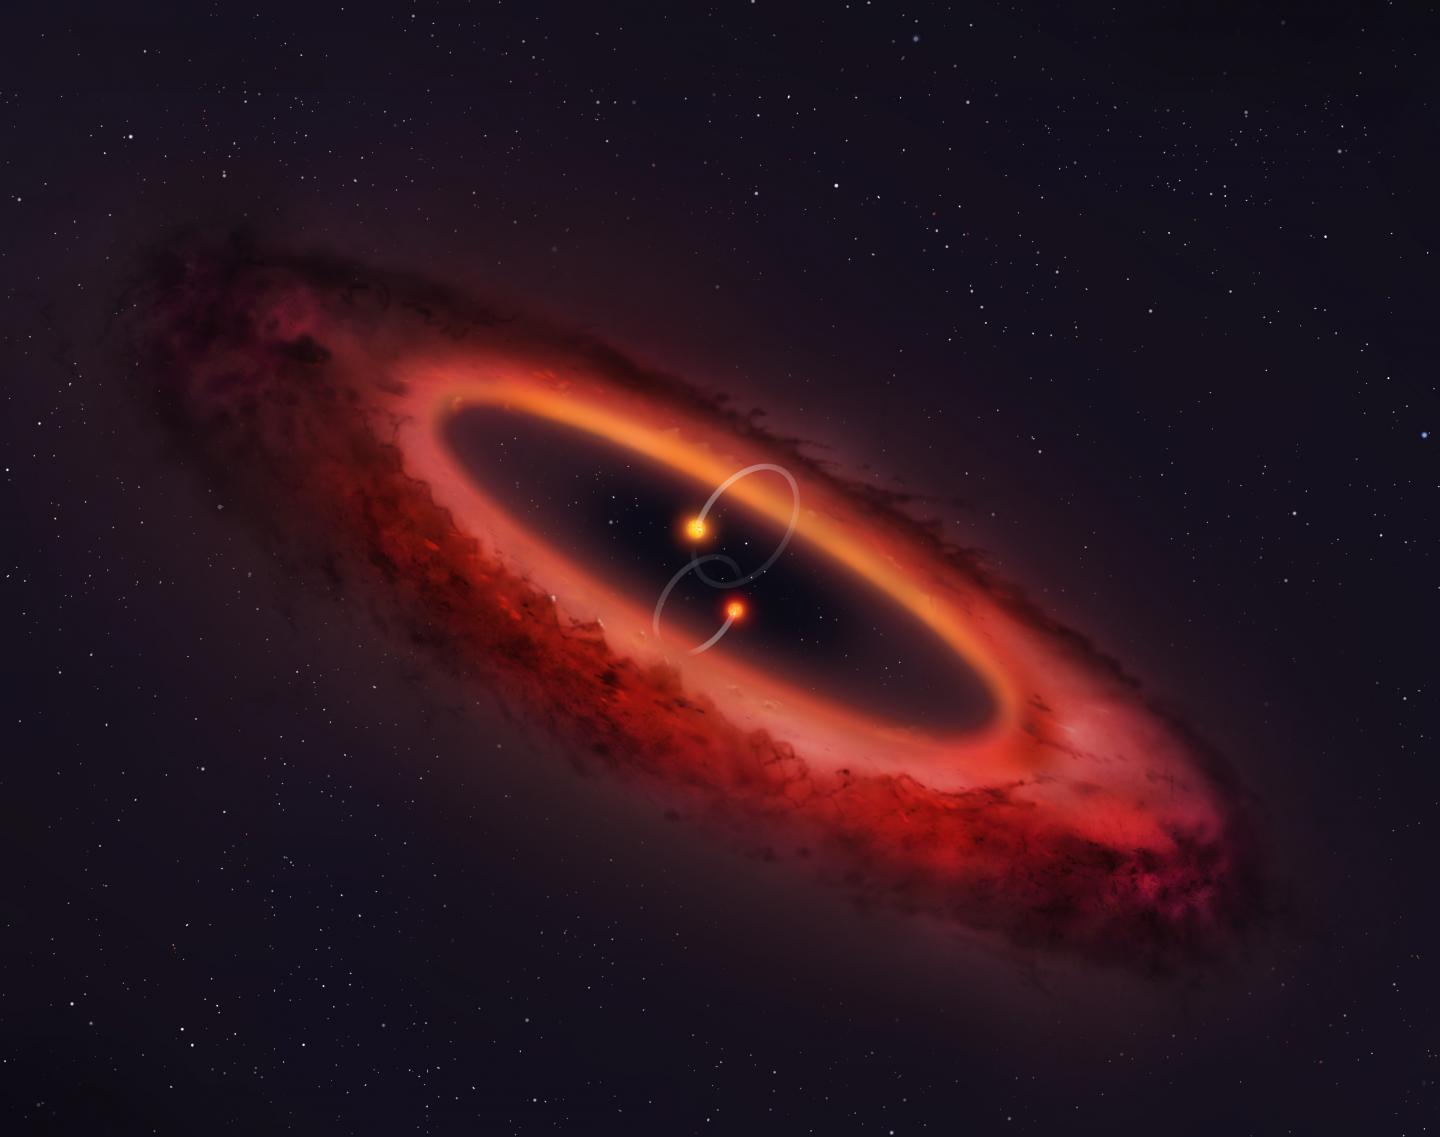 View of the Double Star System and Surrounding Disc